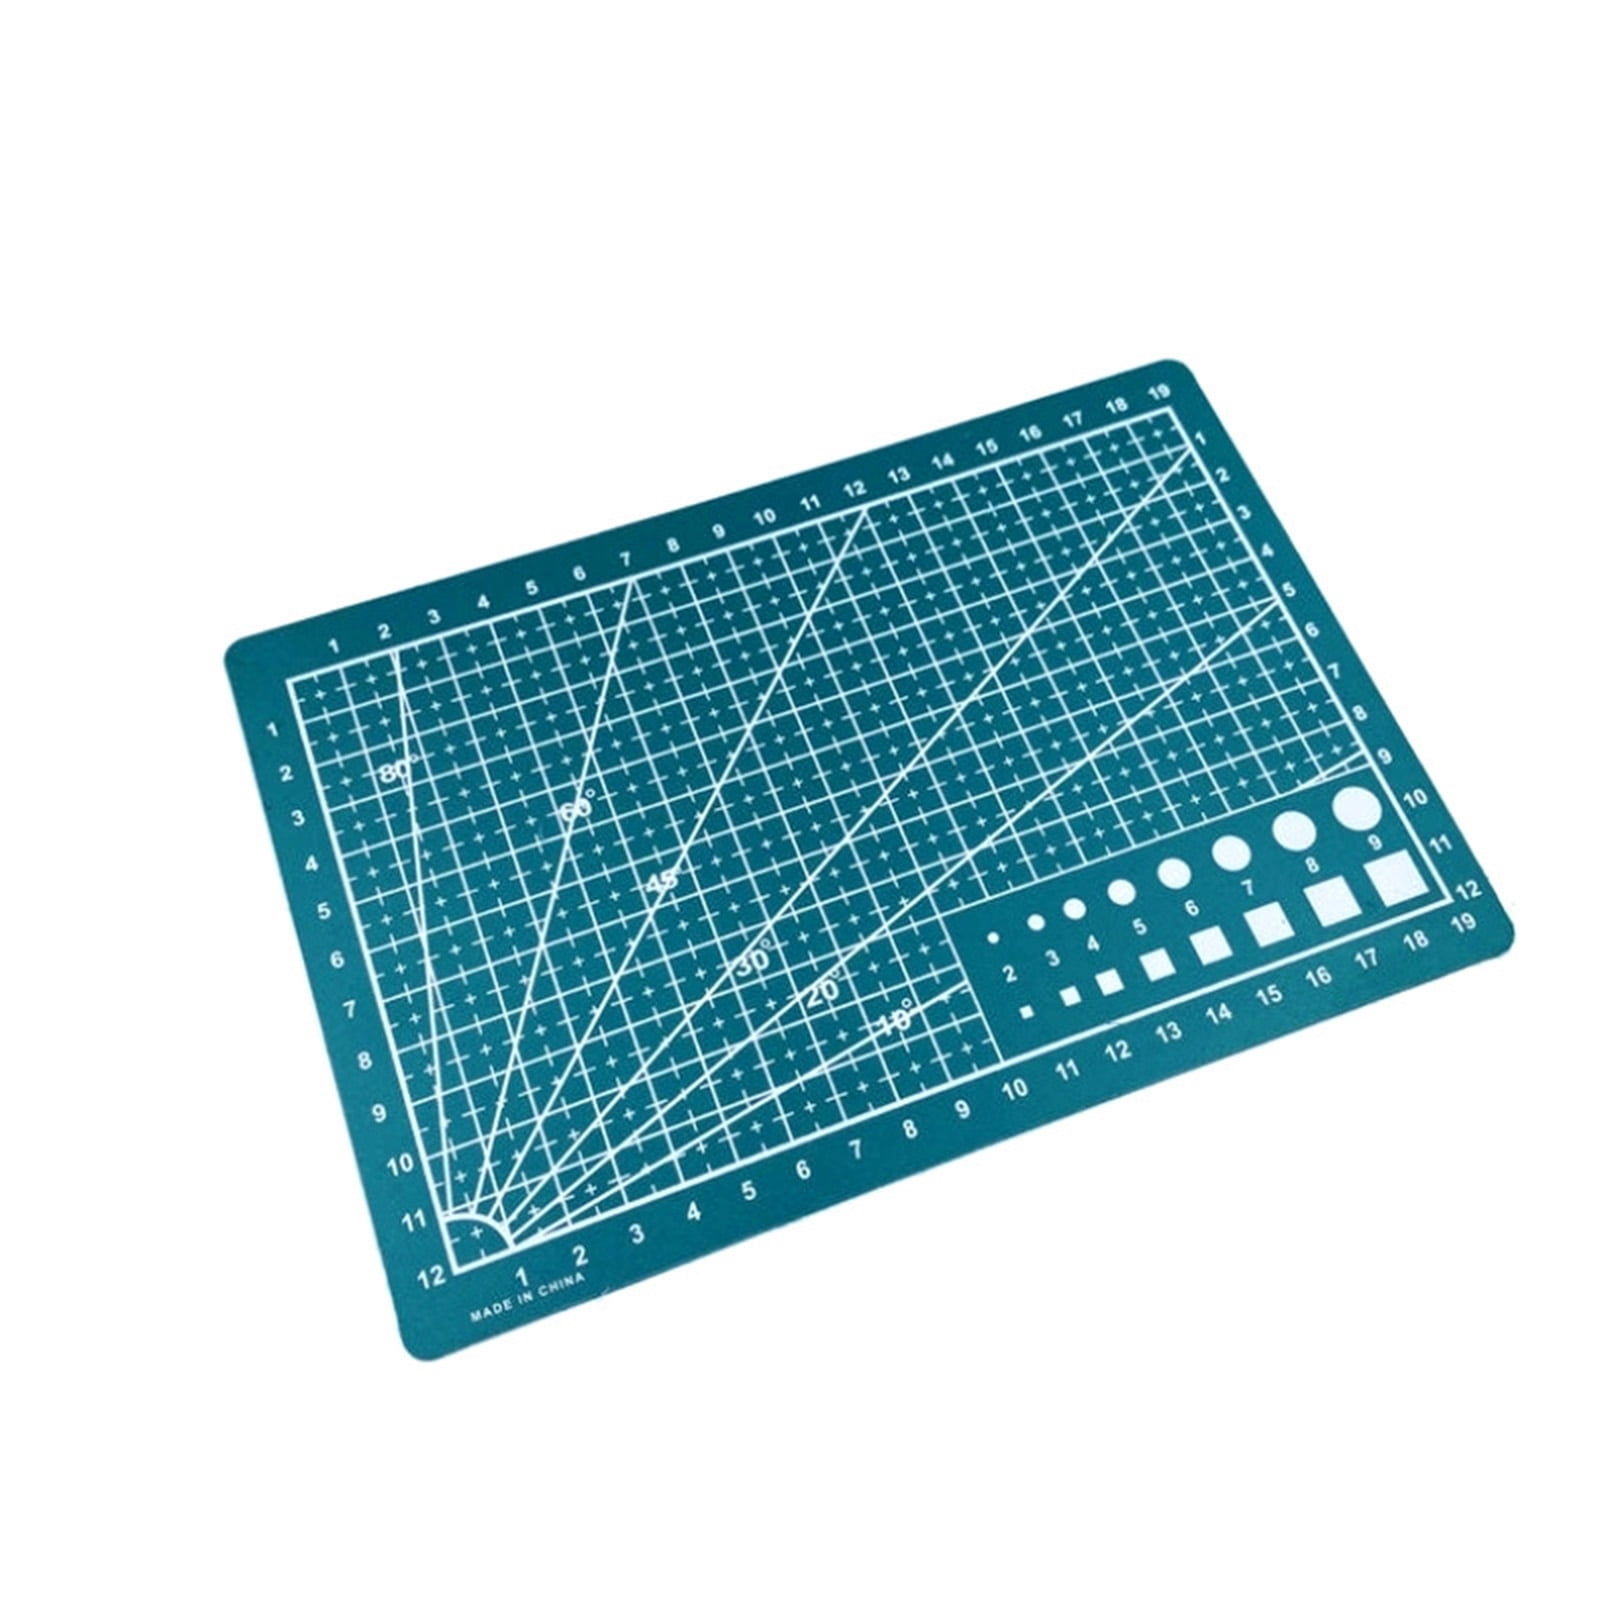 A3 A4 Cutting Mats Pvc Rectangle Grid Lines Self Healing Cutting Board Tool Fabric Leather Paper Craft Tools Plate Pad Color : Green, Paper Size : A4 